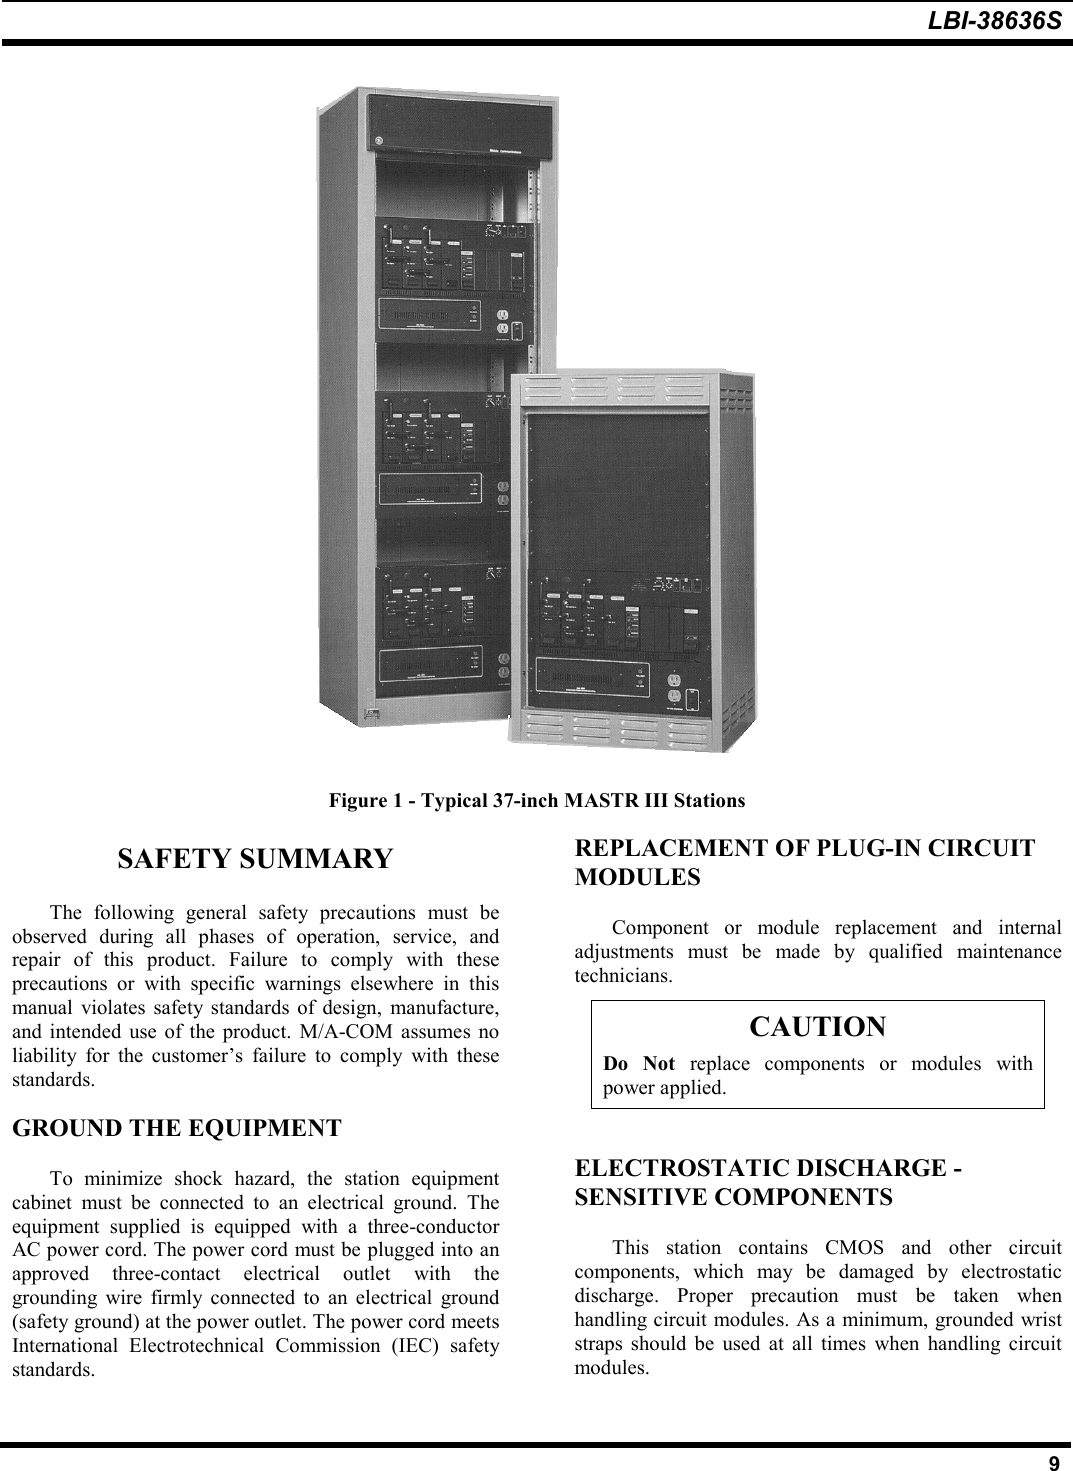 LBI-38636S9Figure 1 - Typical 37-inch MASTR III StationsSAFETY SUMMARYThe following general safety precautions must beobserved during all phases of operation, service, andrepair of this product. Failure to comply with theseprecautions or with specific warnings elsewhere in thismanual violates safety standards of design, manufacture,and intended use of the product. M/A-COM assumes noliability for the customer’s failure to comply with thesestandards.GROUND THE EQUIPMENTTo minimize shock hazard, the station equipmentcabinet must be connected to an electrical ground. Theequipment supplied is equipped with a three-conductorAC power cord. The power cord must be plugged into anapproved three-contact electrical outlet with thegrounding wire firmly connected to an electrical ground(safety ground) at the power outlet. The power cord meetsInternational Electrotechnical Commission (IEC) safetystandards.REPLACEMENT OF PLUG-IN CIRCUITMODULESComponent or module replacement and internaladjustments must be made by qualified maintenancetechnicians.CAUTIONDo Not replace components or modules withpower applied.ELECTROSTATIC DISCHARGE -SENSITIVE COMPONENTSThis station contains CMOS and other circuitcomponents, which may be damaged by electrostaticdischarge. Proper precaution must be taken whenhandling circuit modules. As a minimum, grounded wriststraps should be used at all times when handling circuitmodules.